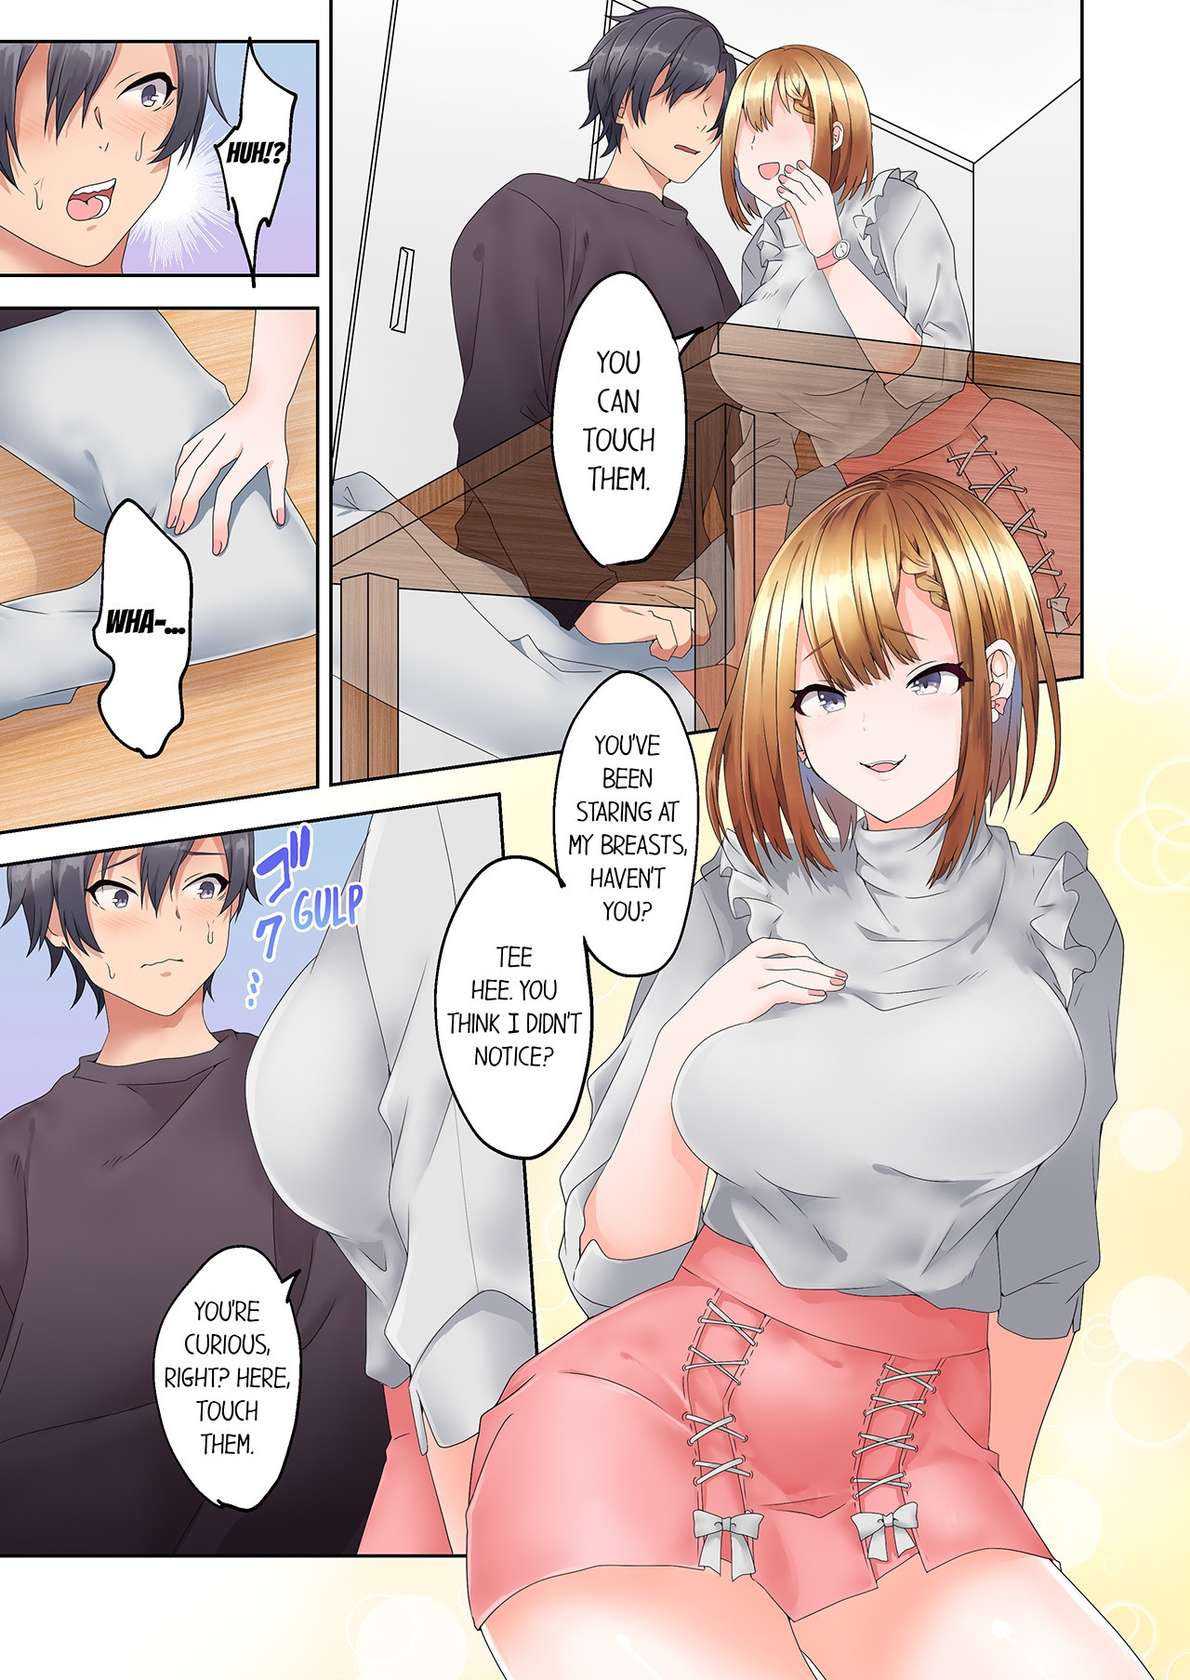 [Himino] Katei Kyoushi no Yuuwaku Sex "Gomu... Nakunaru made Tsukaou ne" 1 | My Private Tutor's Tempting Sex - "Let's Do It To Our Hearts' Content Until We Run Out Of Condoms" 1 [English]